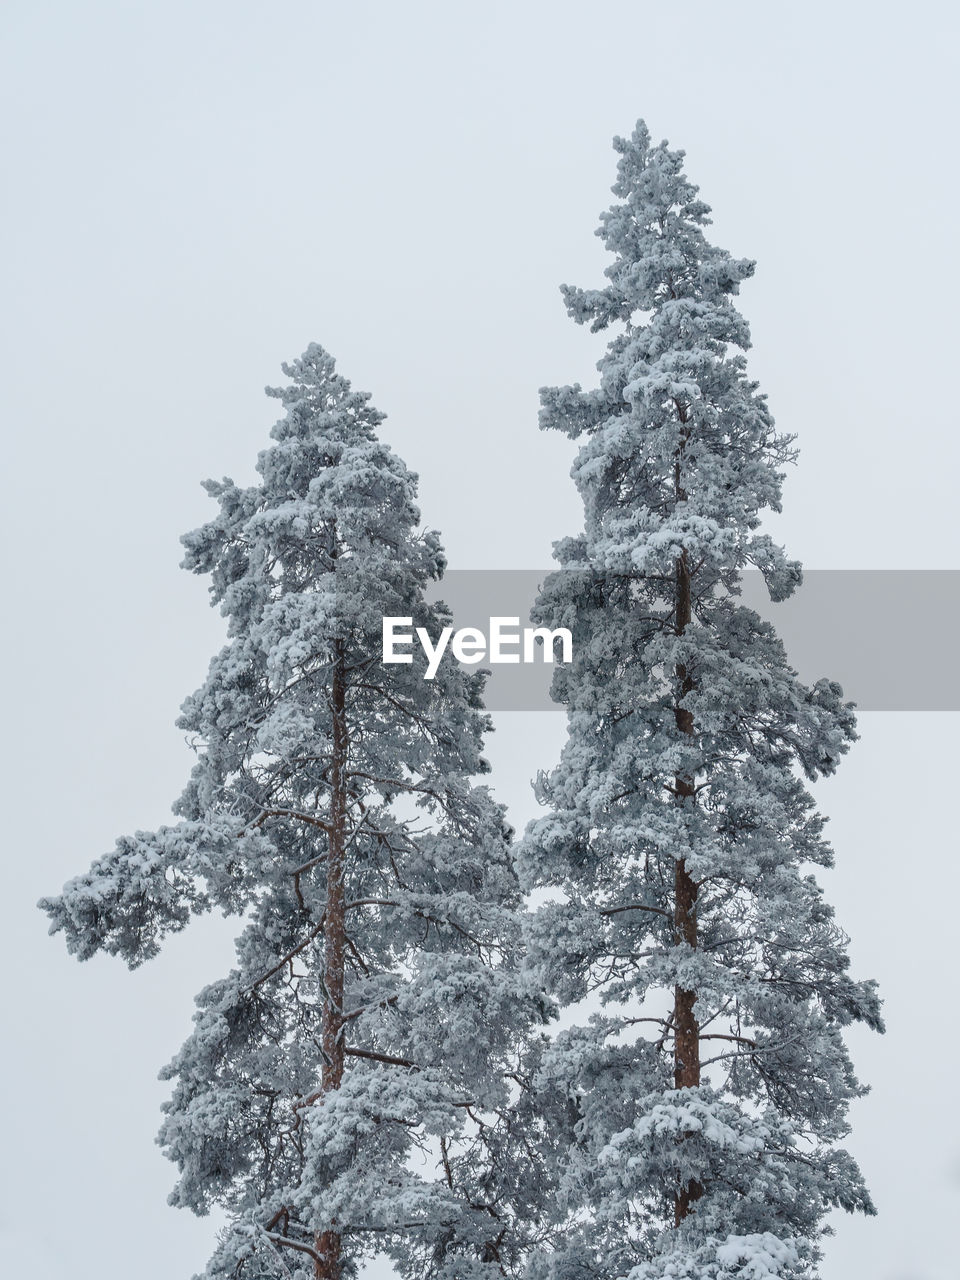 Snow covered trees in finland.